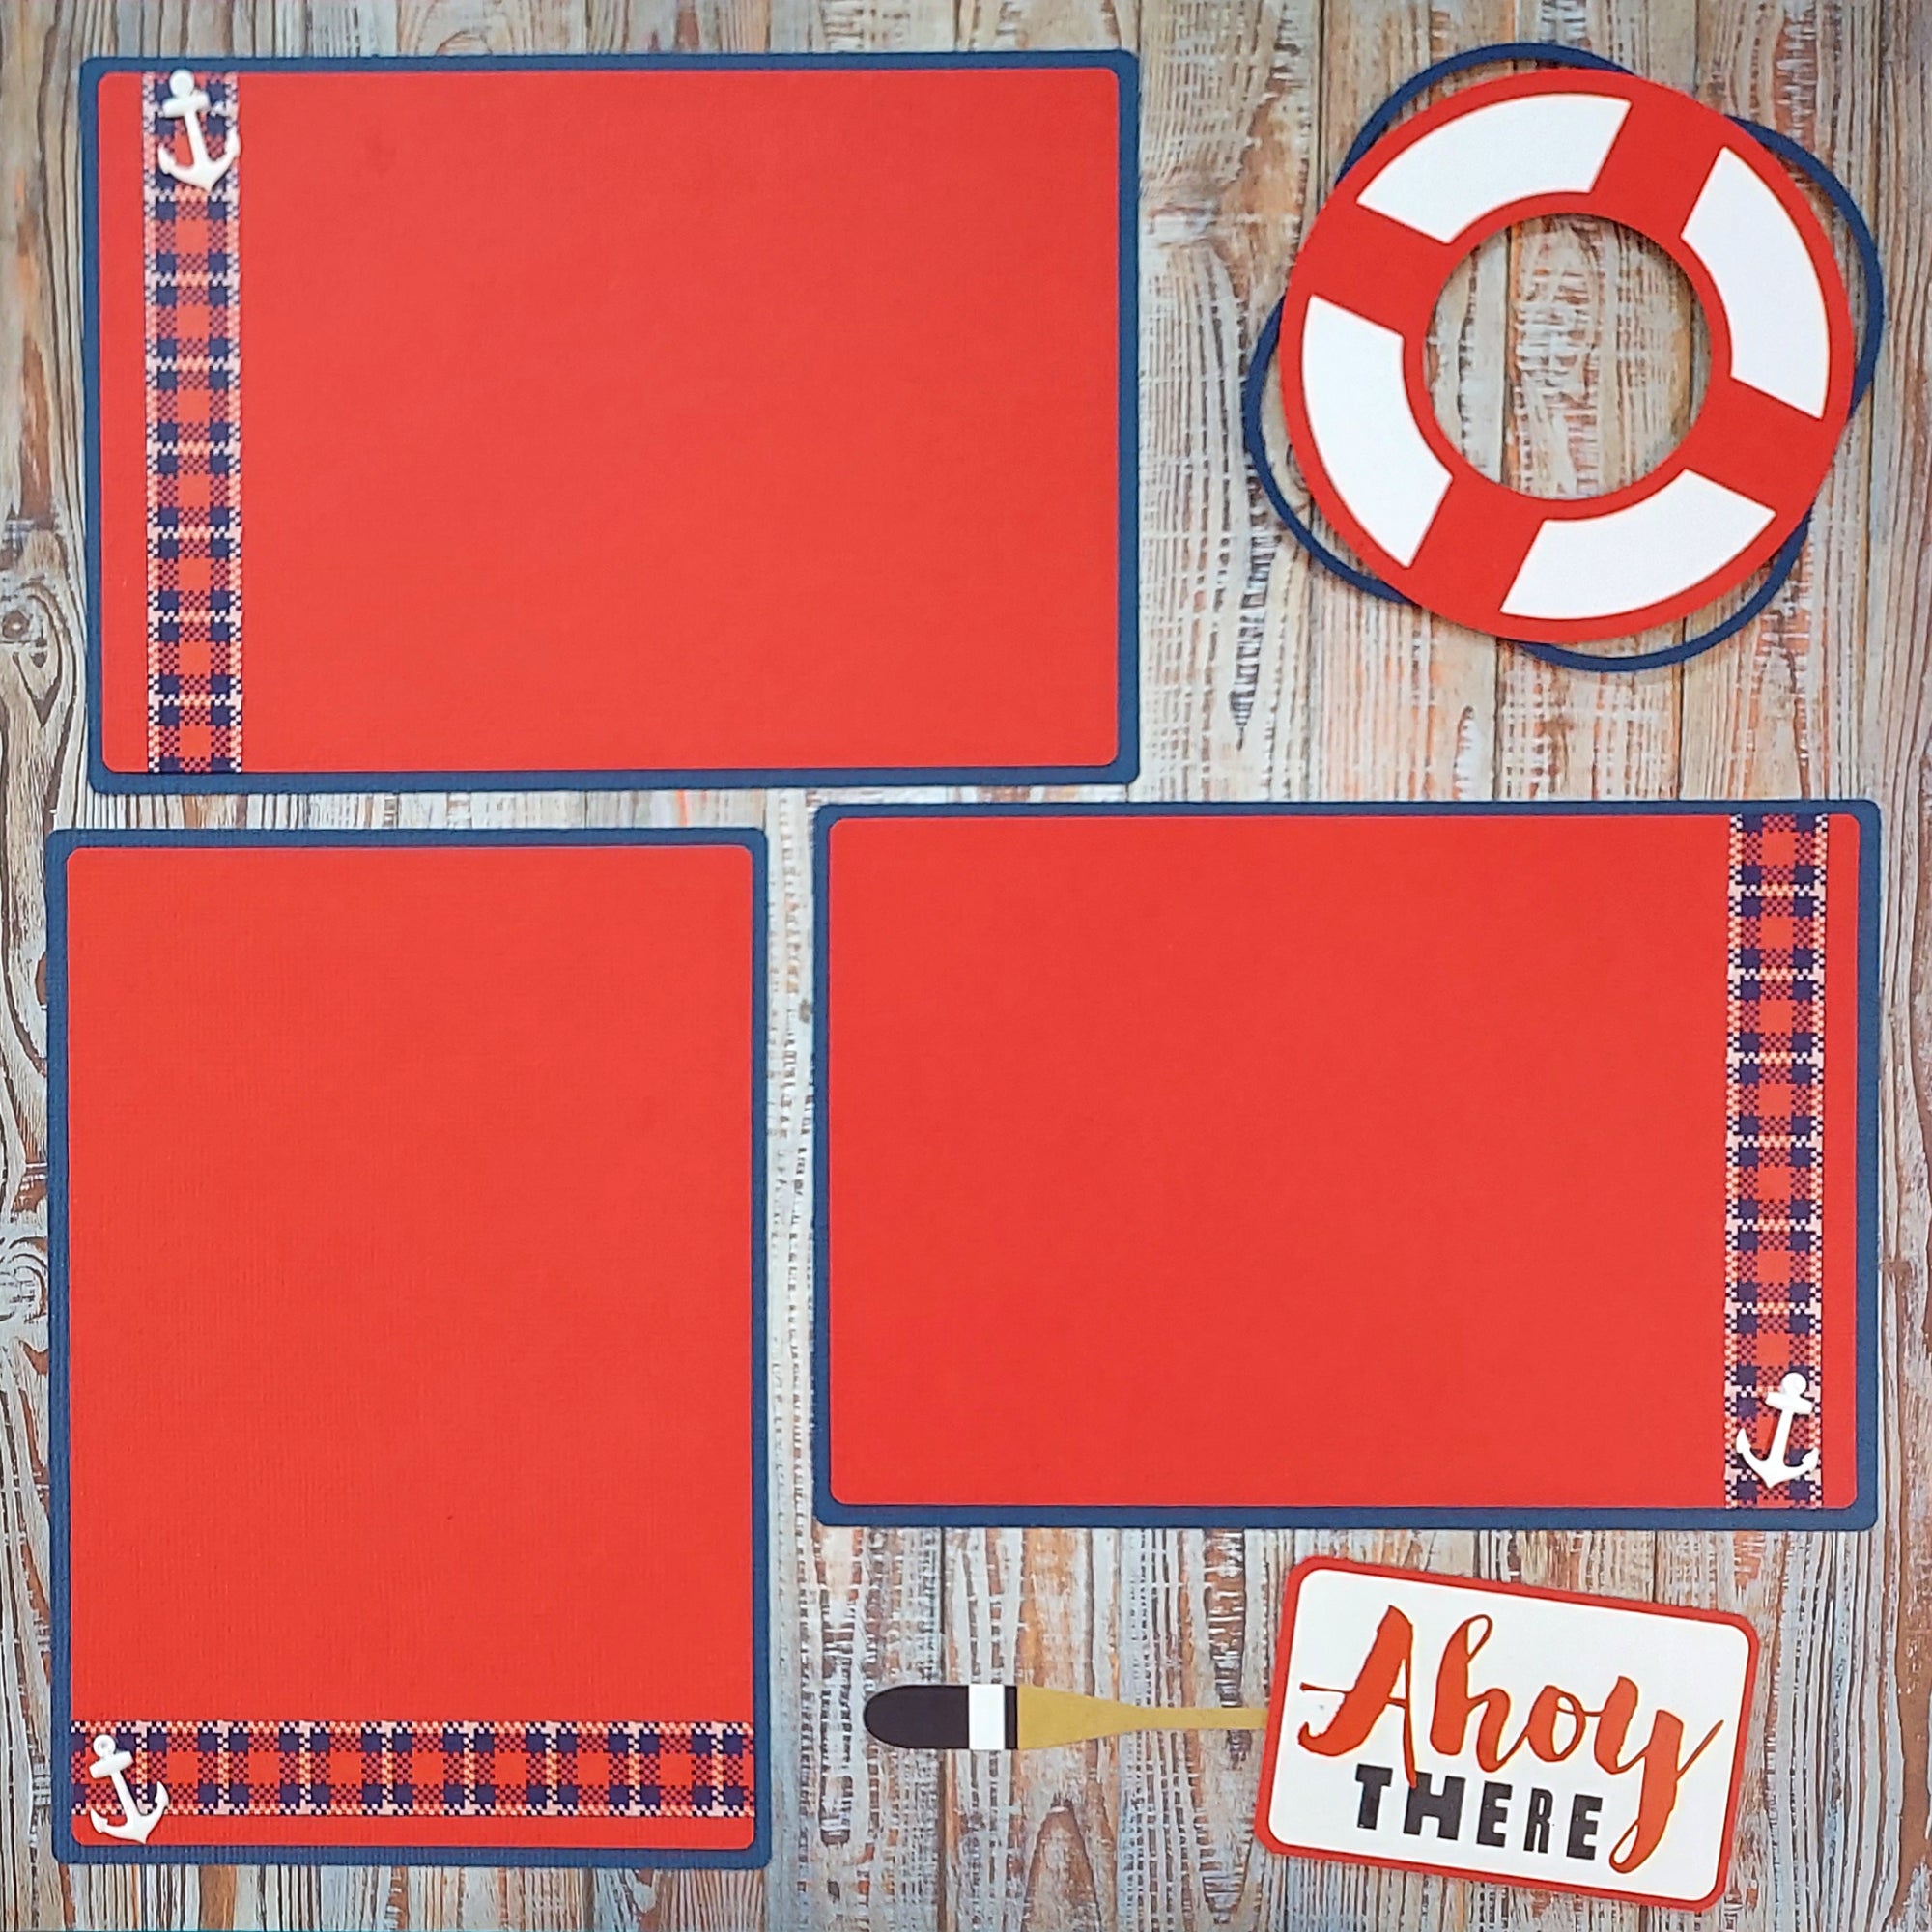 Ahoy! Cruisin' (2) - 12 x 12 Pages, Fully-Assembled & Hand-Crafted 3D Scrapbook Premade by SSC Designs